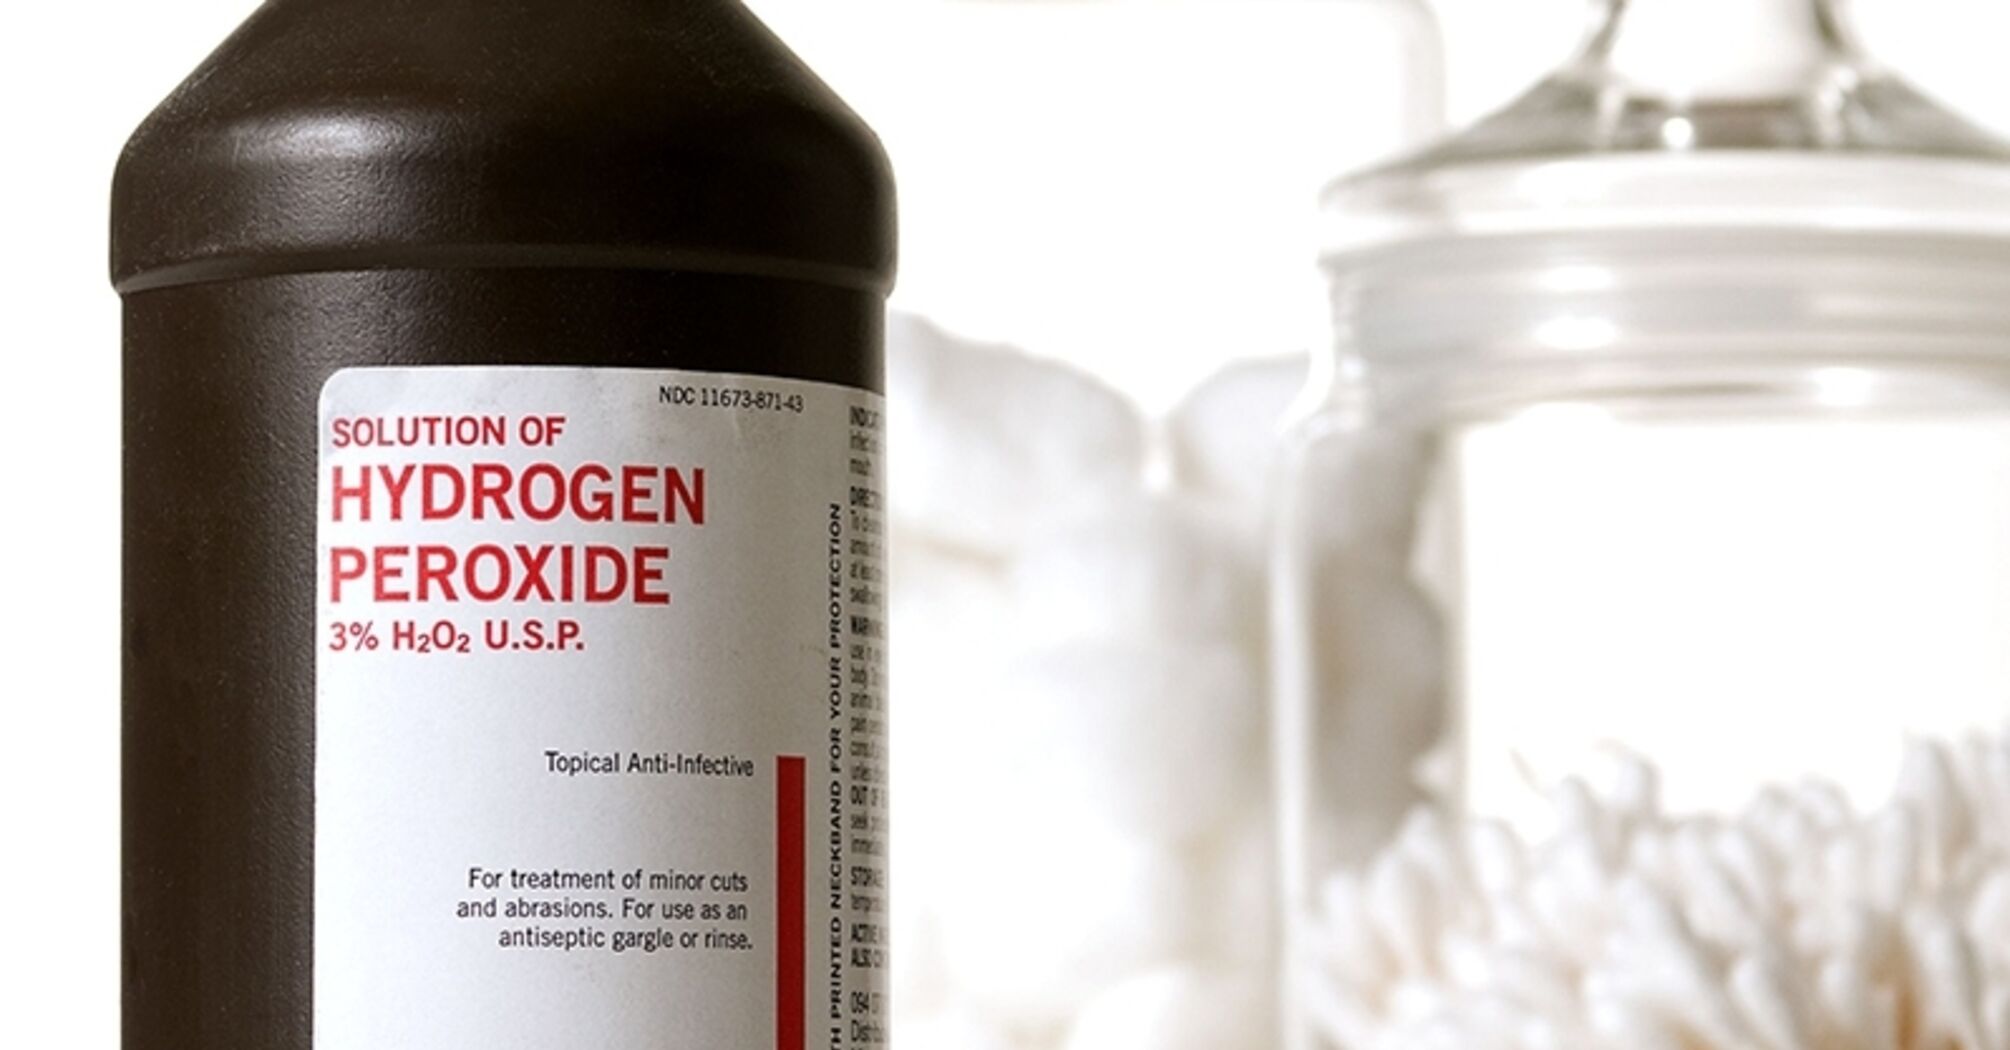 How to use hydrogen peroxide in household